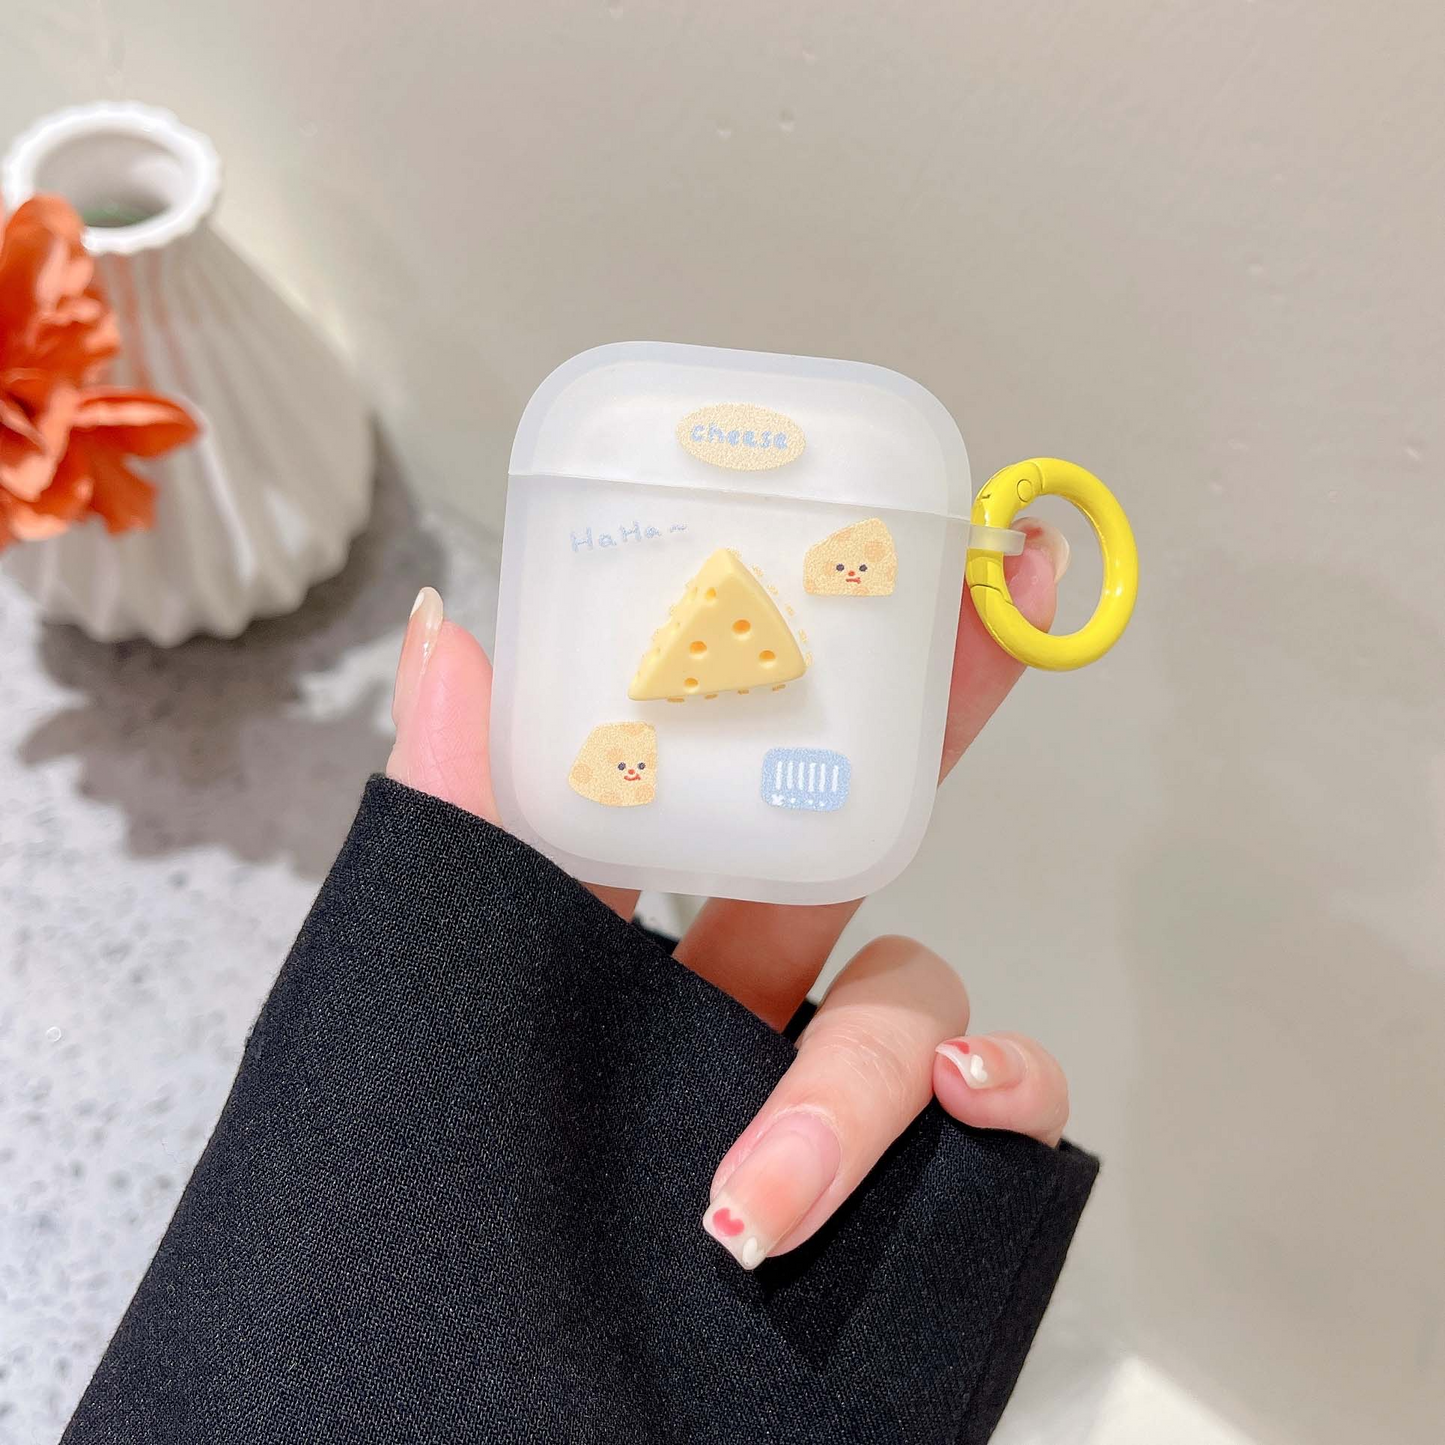 Cheese Slice AirPods Case Cover